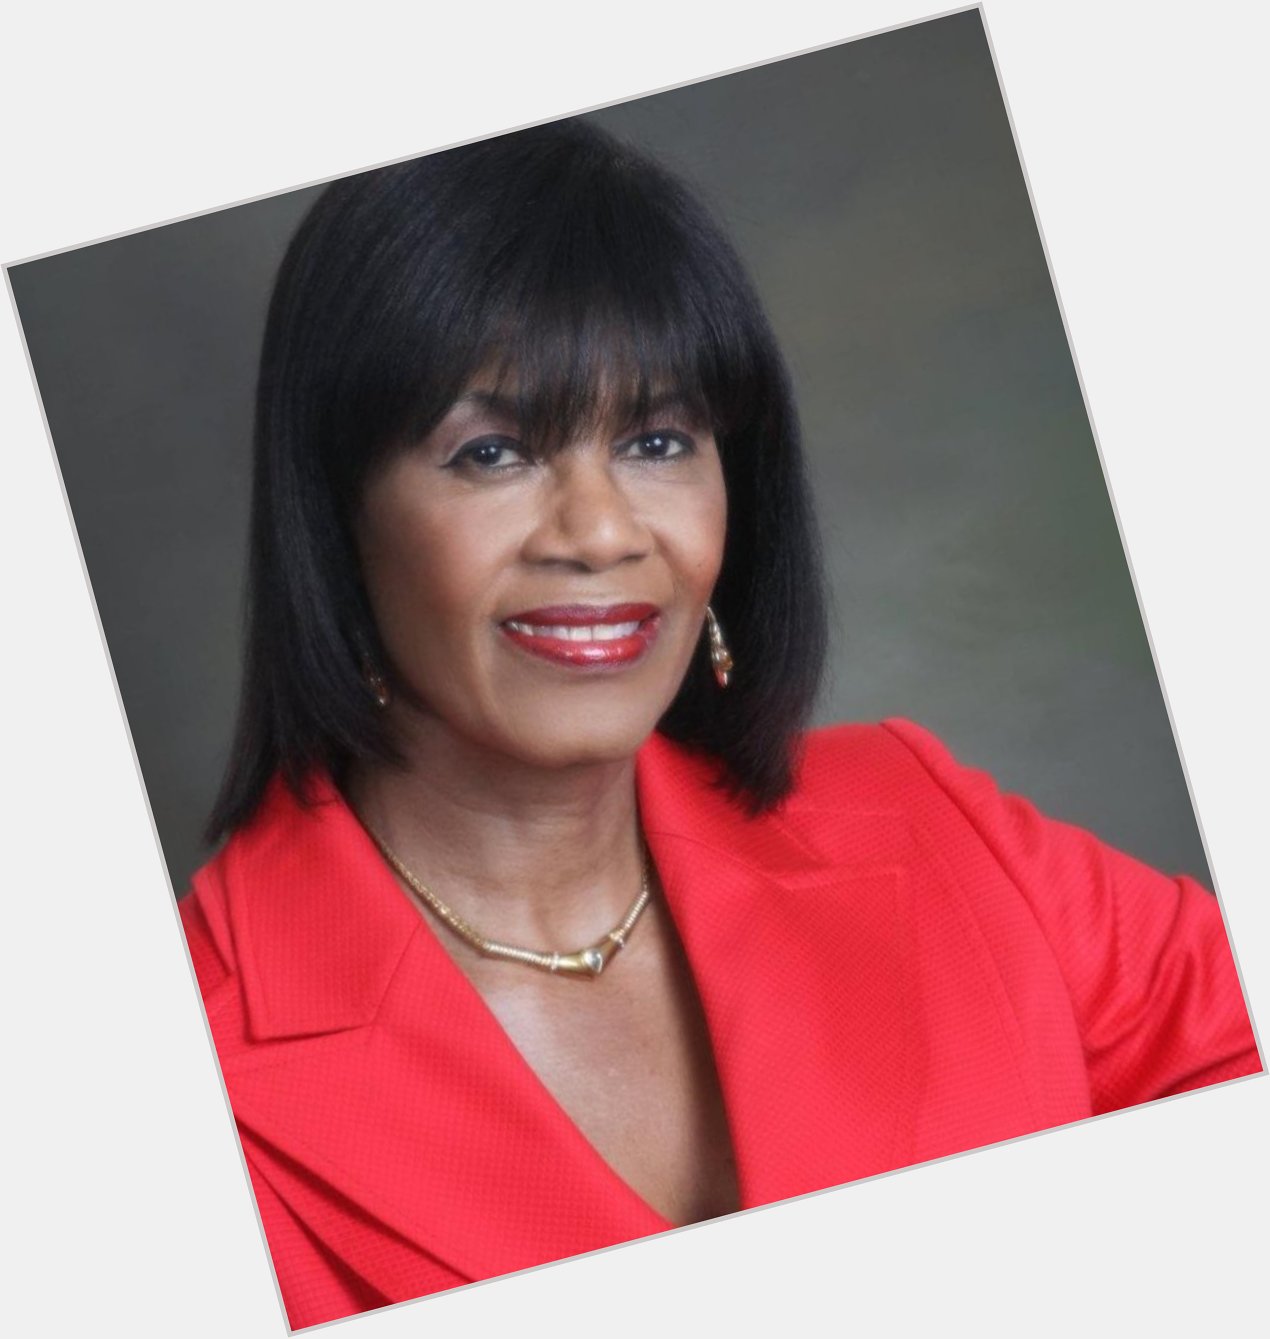 Taking a moment to wish former PM Portia Simpson-Miller a Happy Birthday... 